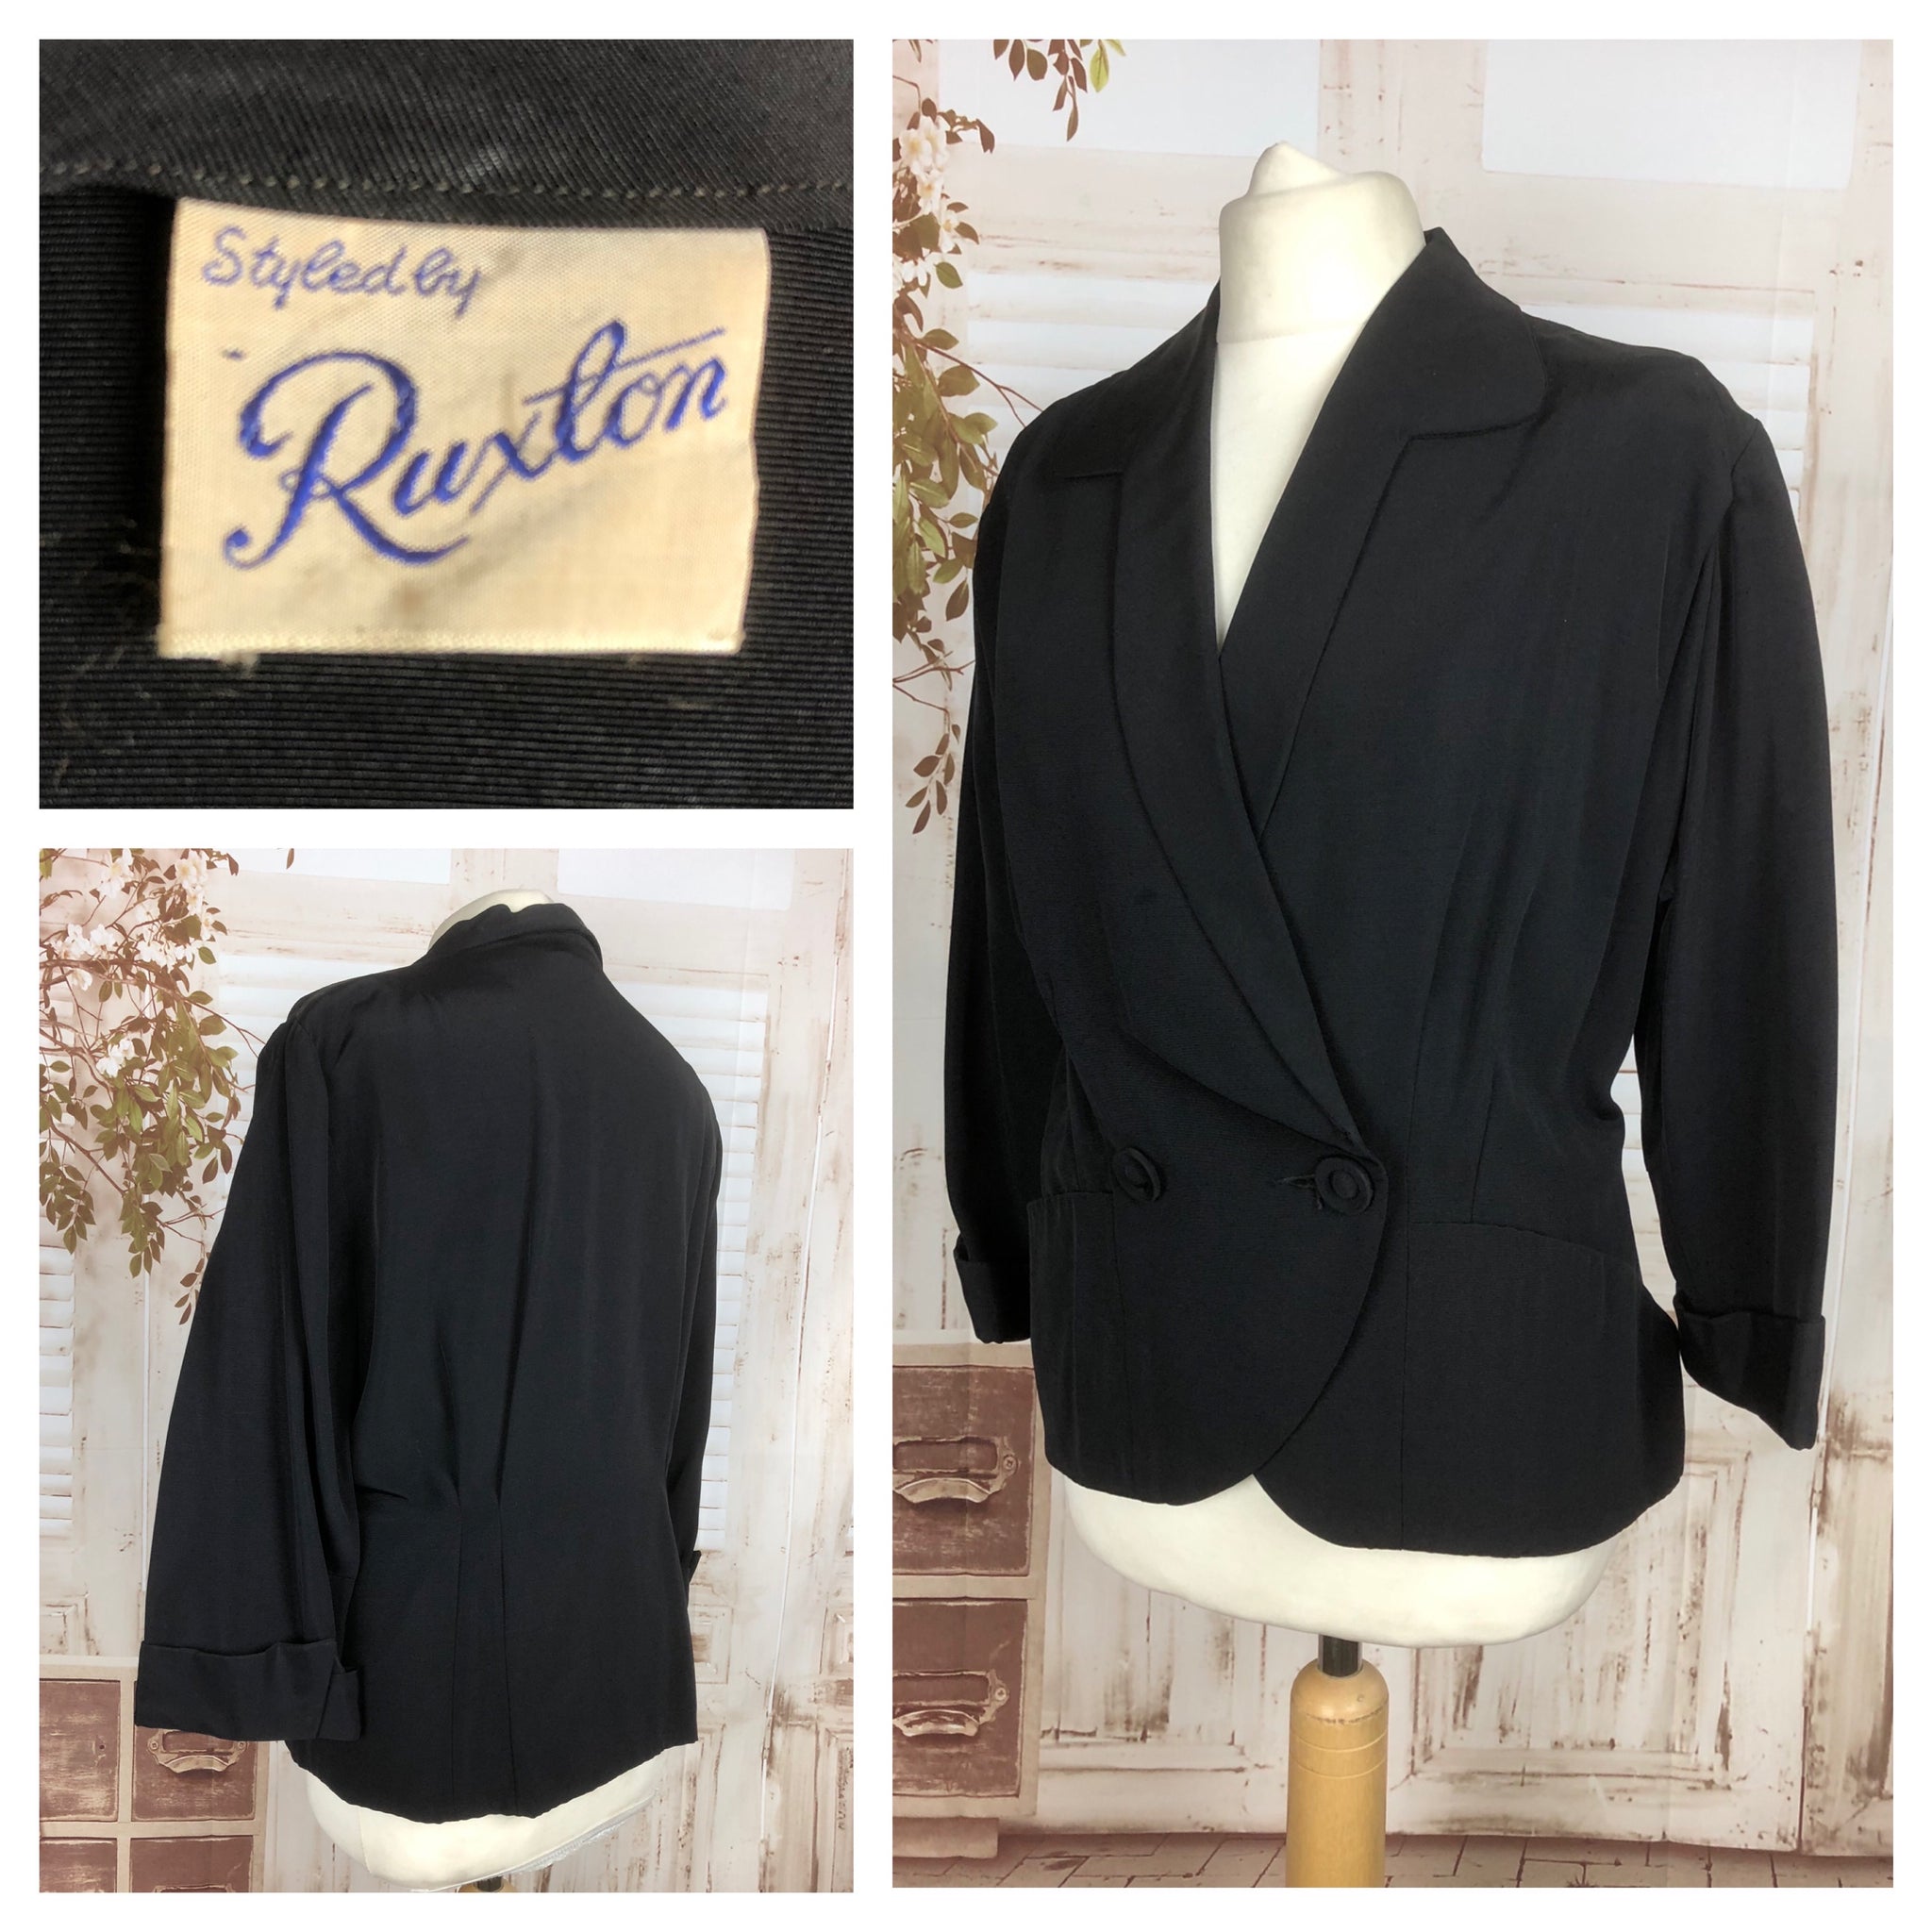 LAYAWAY PAYMENT 1 OF 2 - RESERVED FOR PATRICIA - Original Late 1940s 40s Volup Vintage Black Blazer